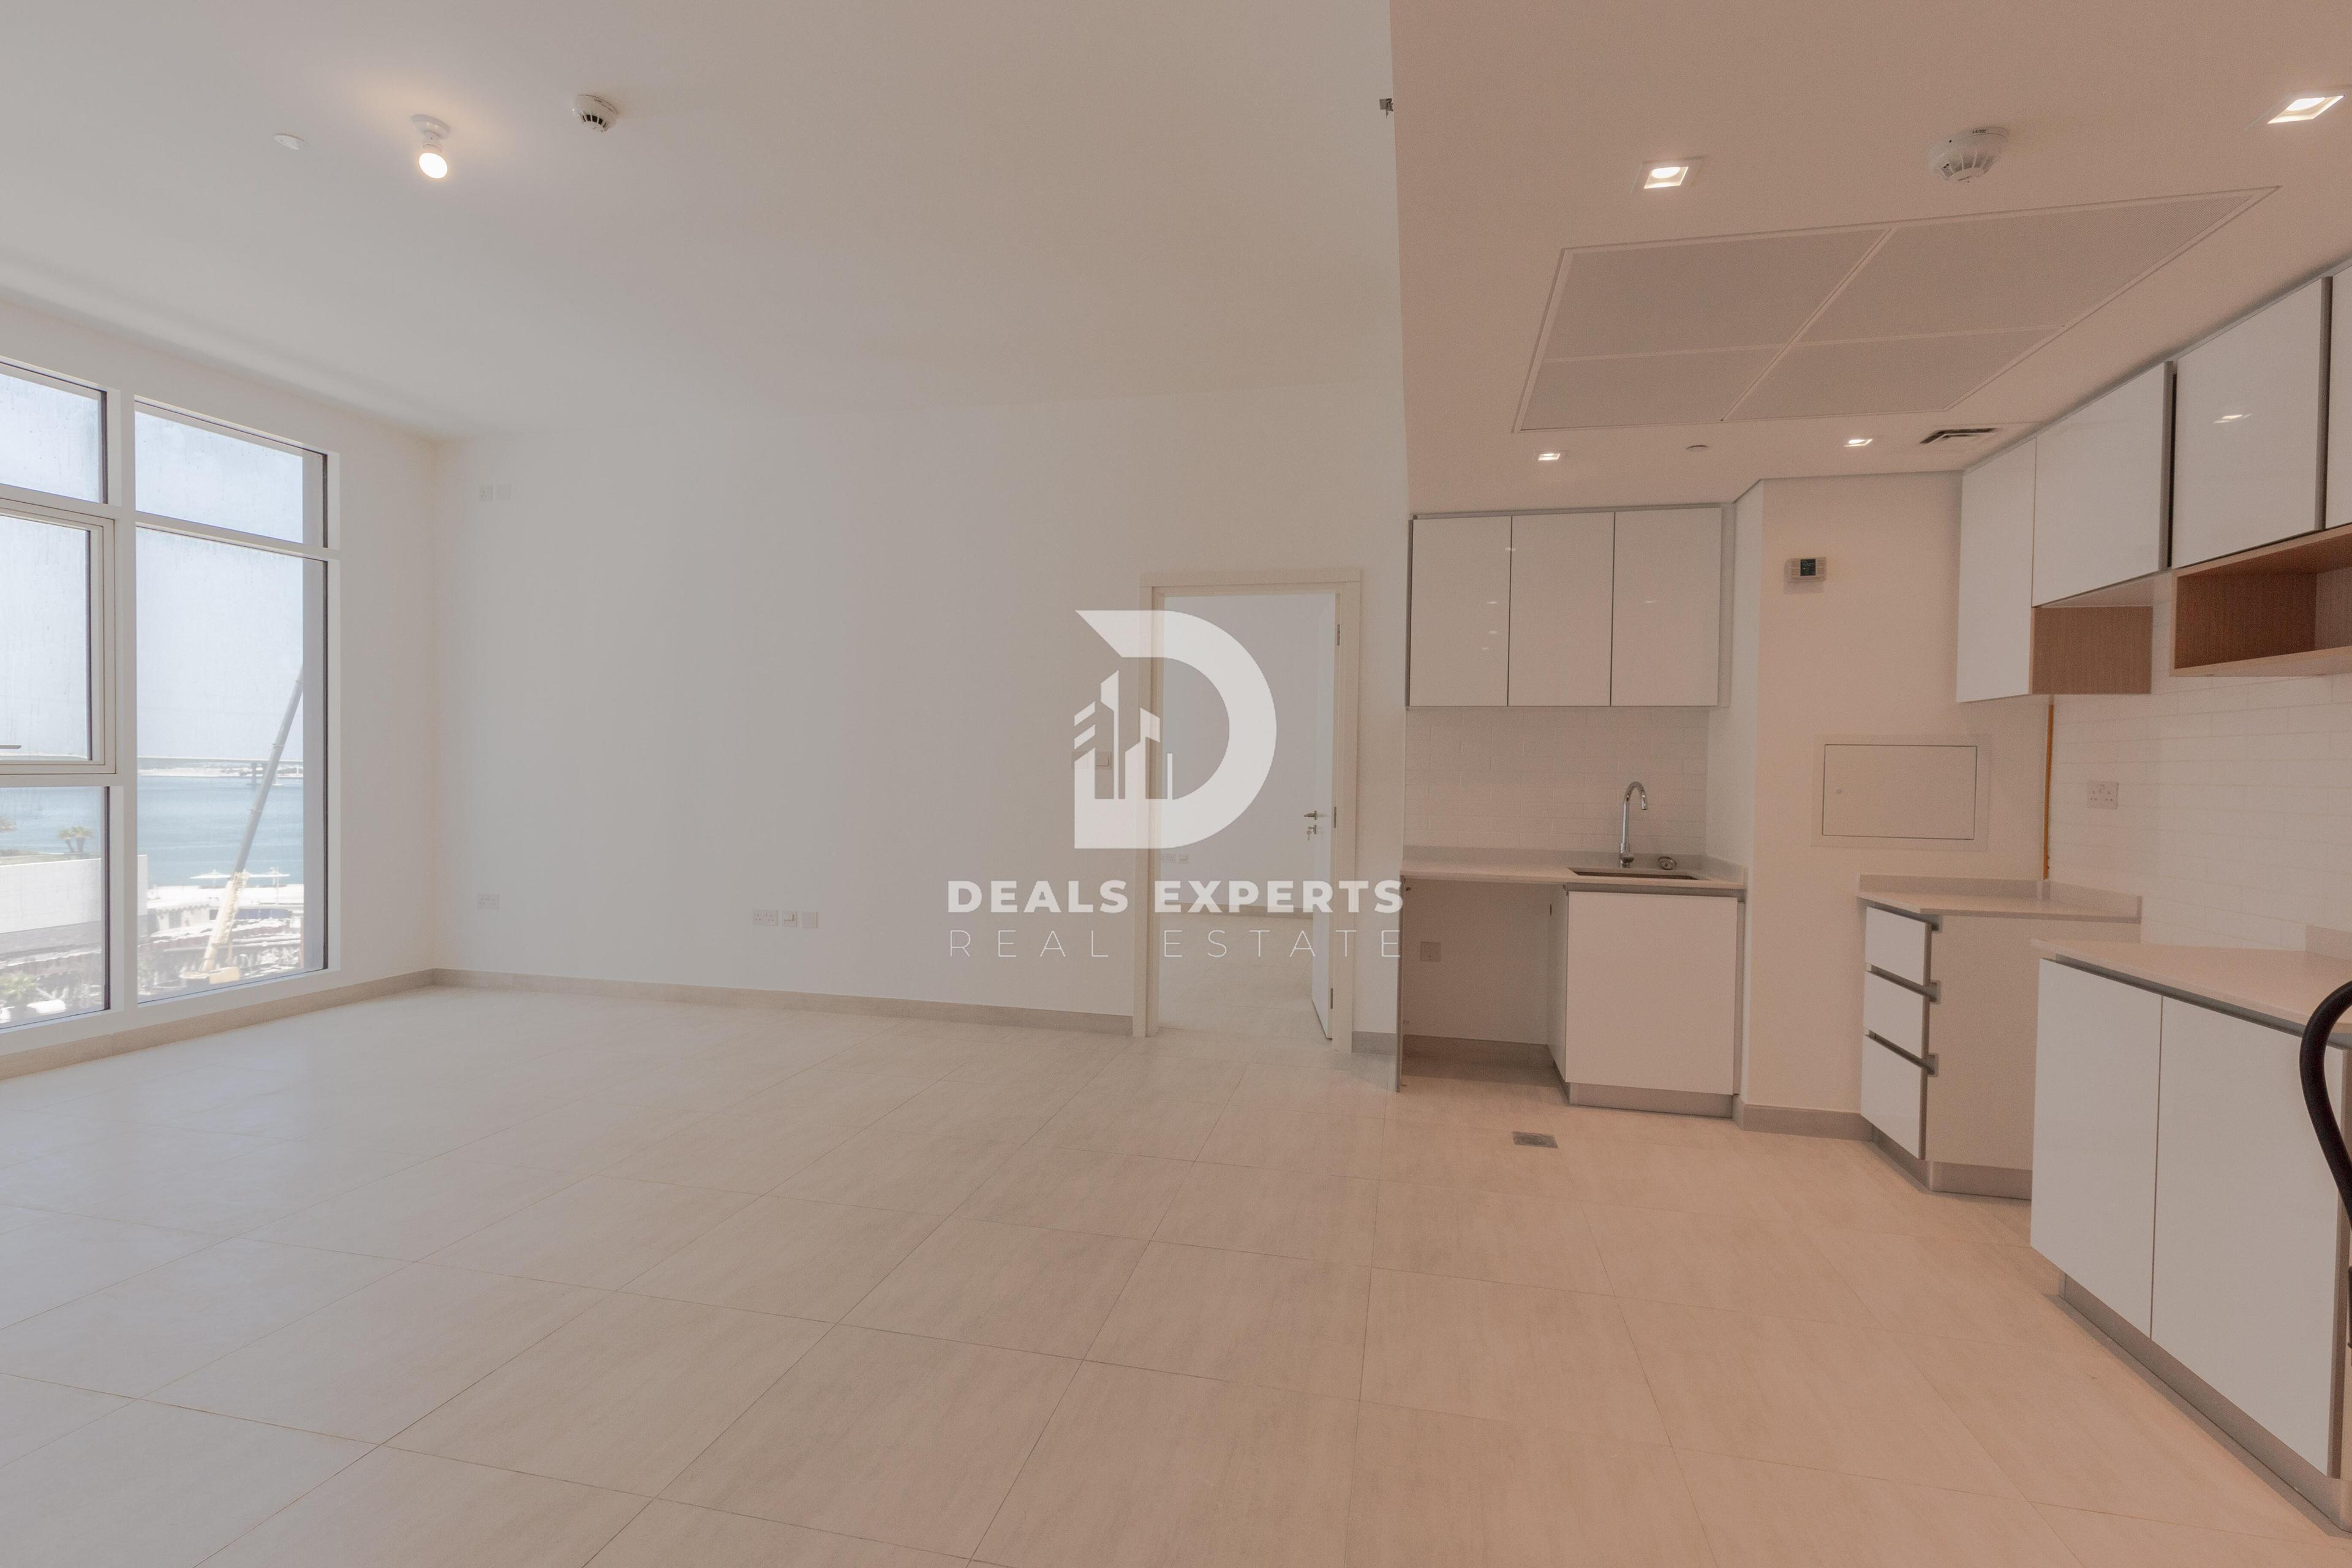 3 bed, 3 bath Apartment for rent in The Bridges, Shams Abu Dhabi, Al Reem Island, Abu Dhabi for price AED 120000 yearly 